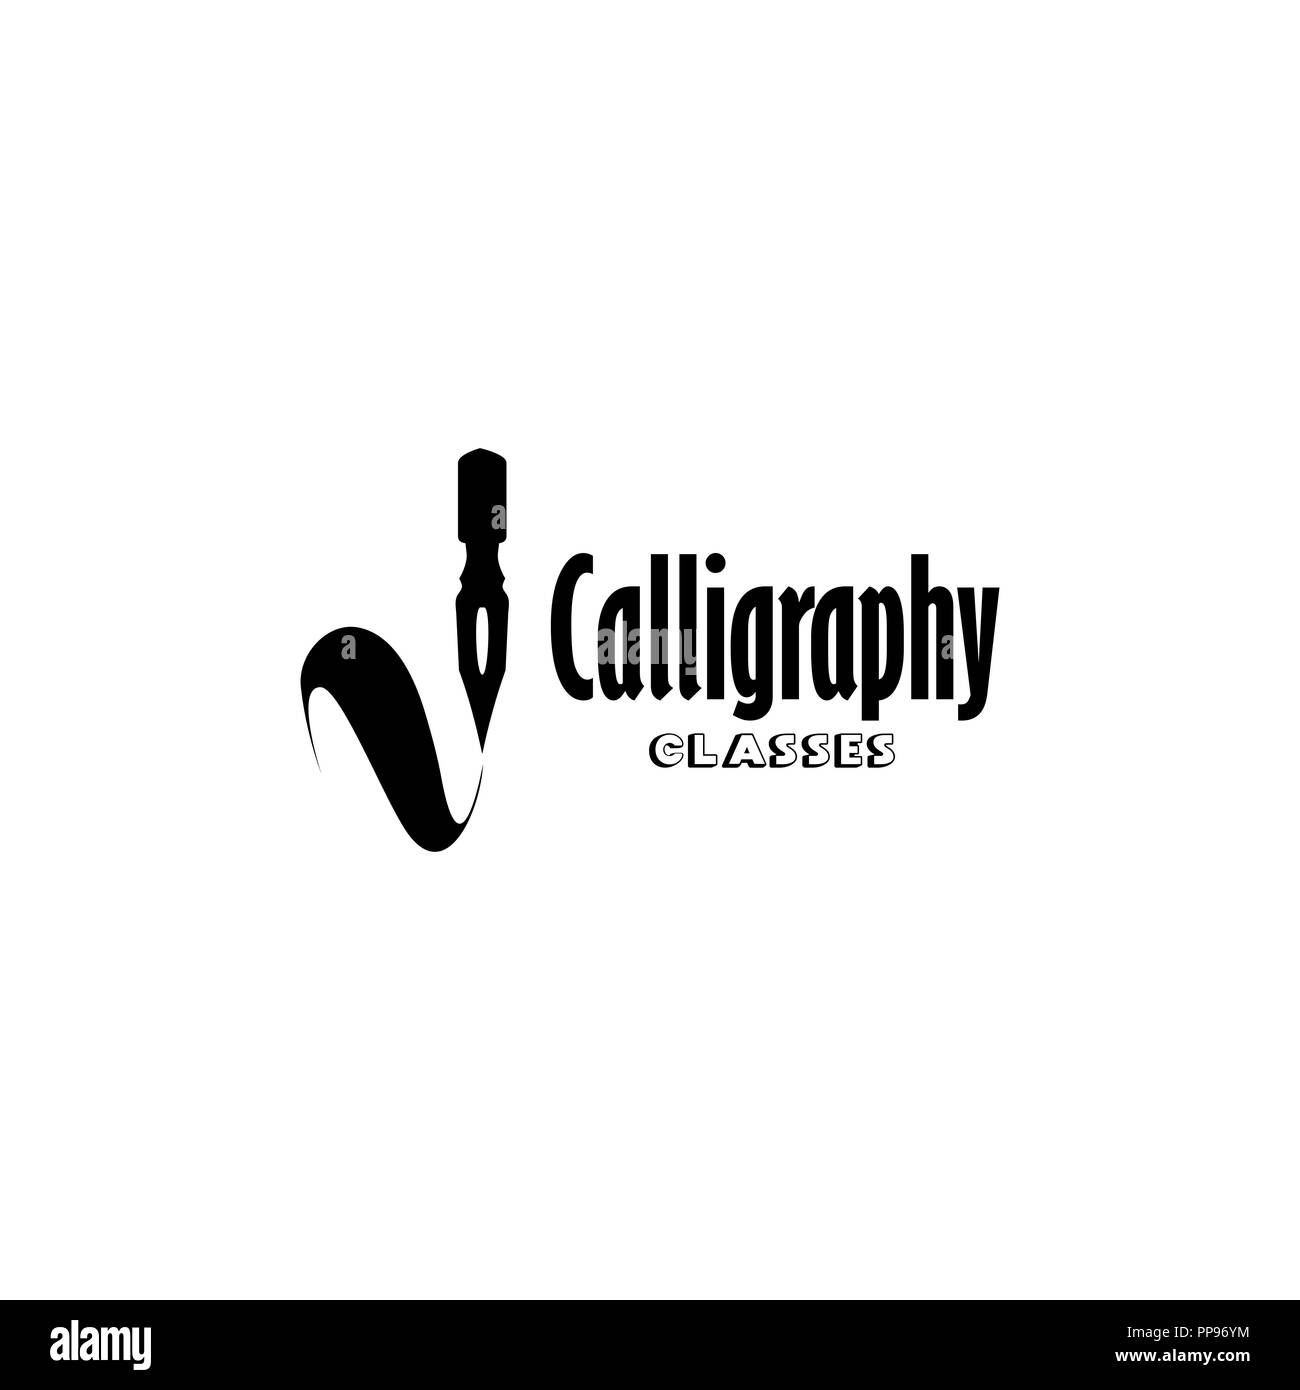 Calligraphy classes lettering logo isolated design. Online School with hand, calligraphic fonts. Black metal laser cut sign. Creativity logotype for shop layout or branding. Isolated vector Stock Vector